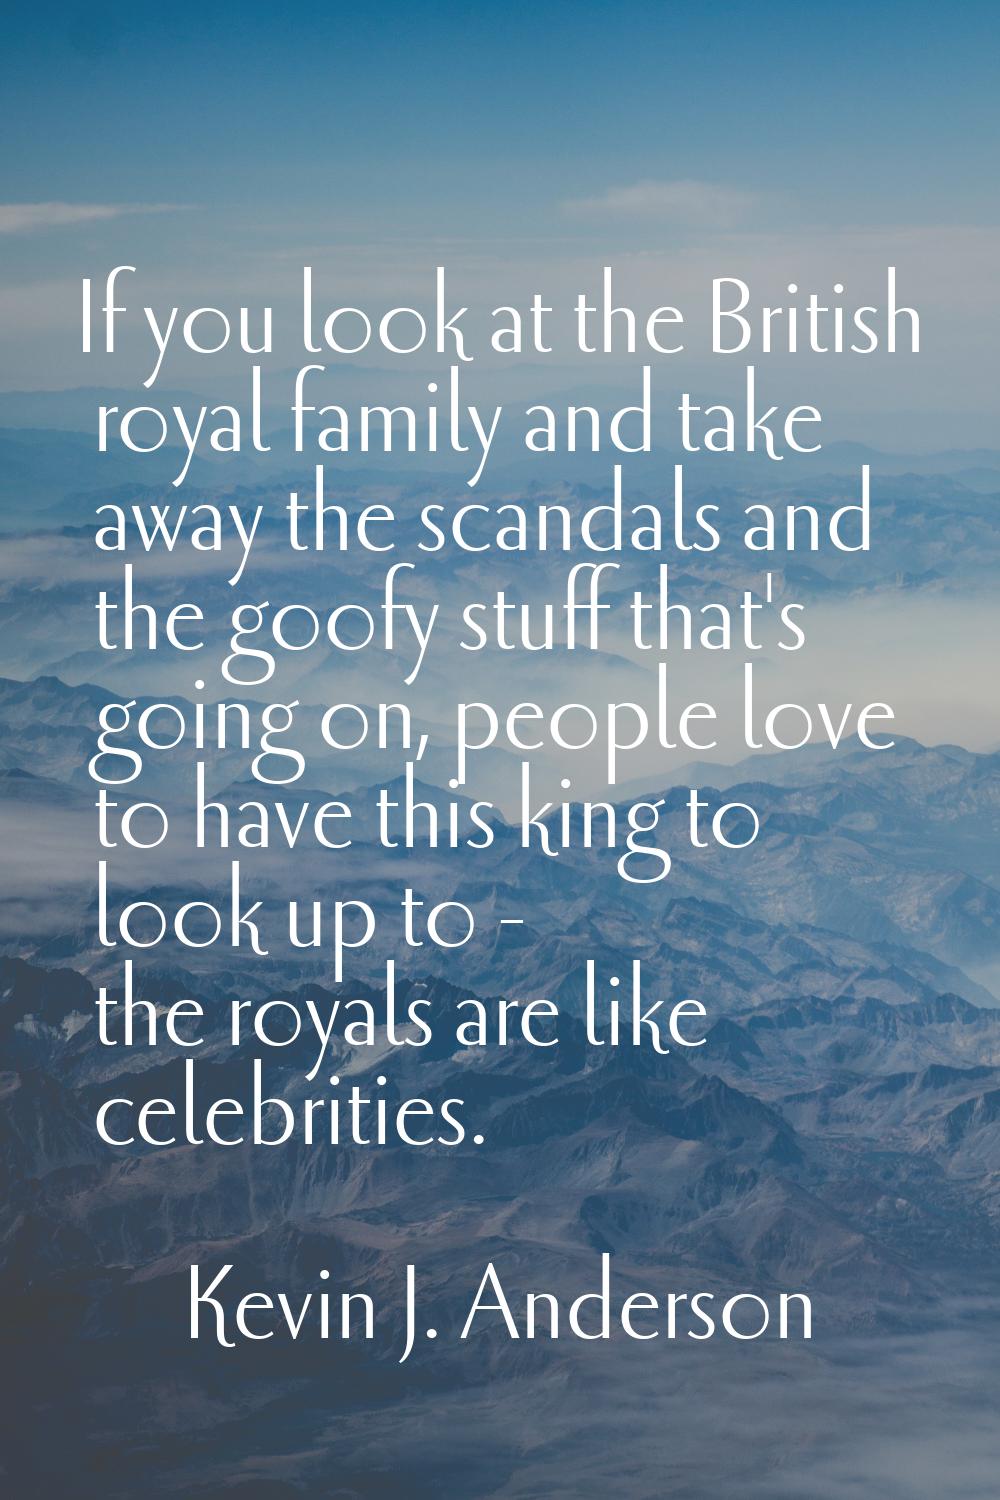 If you look at the British royal family and take away the scandals and the goofy stuff that's going